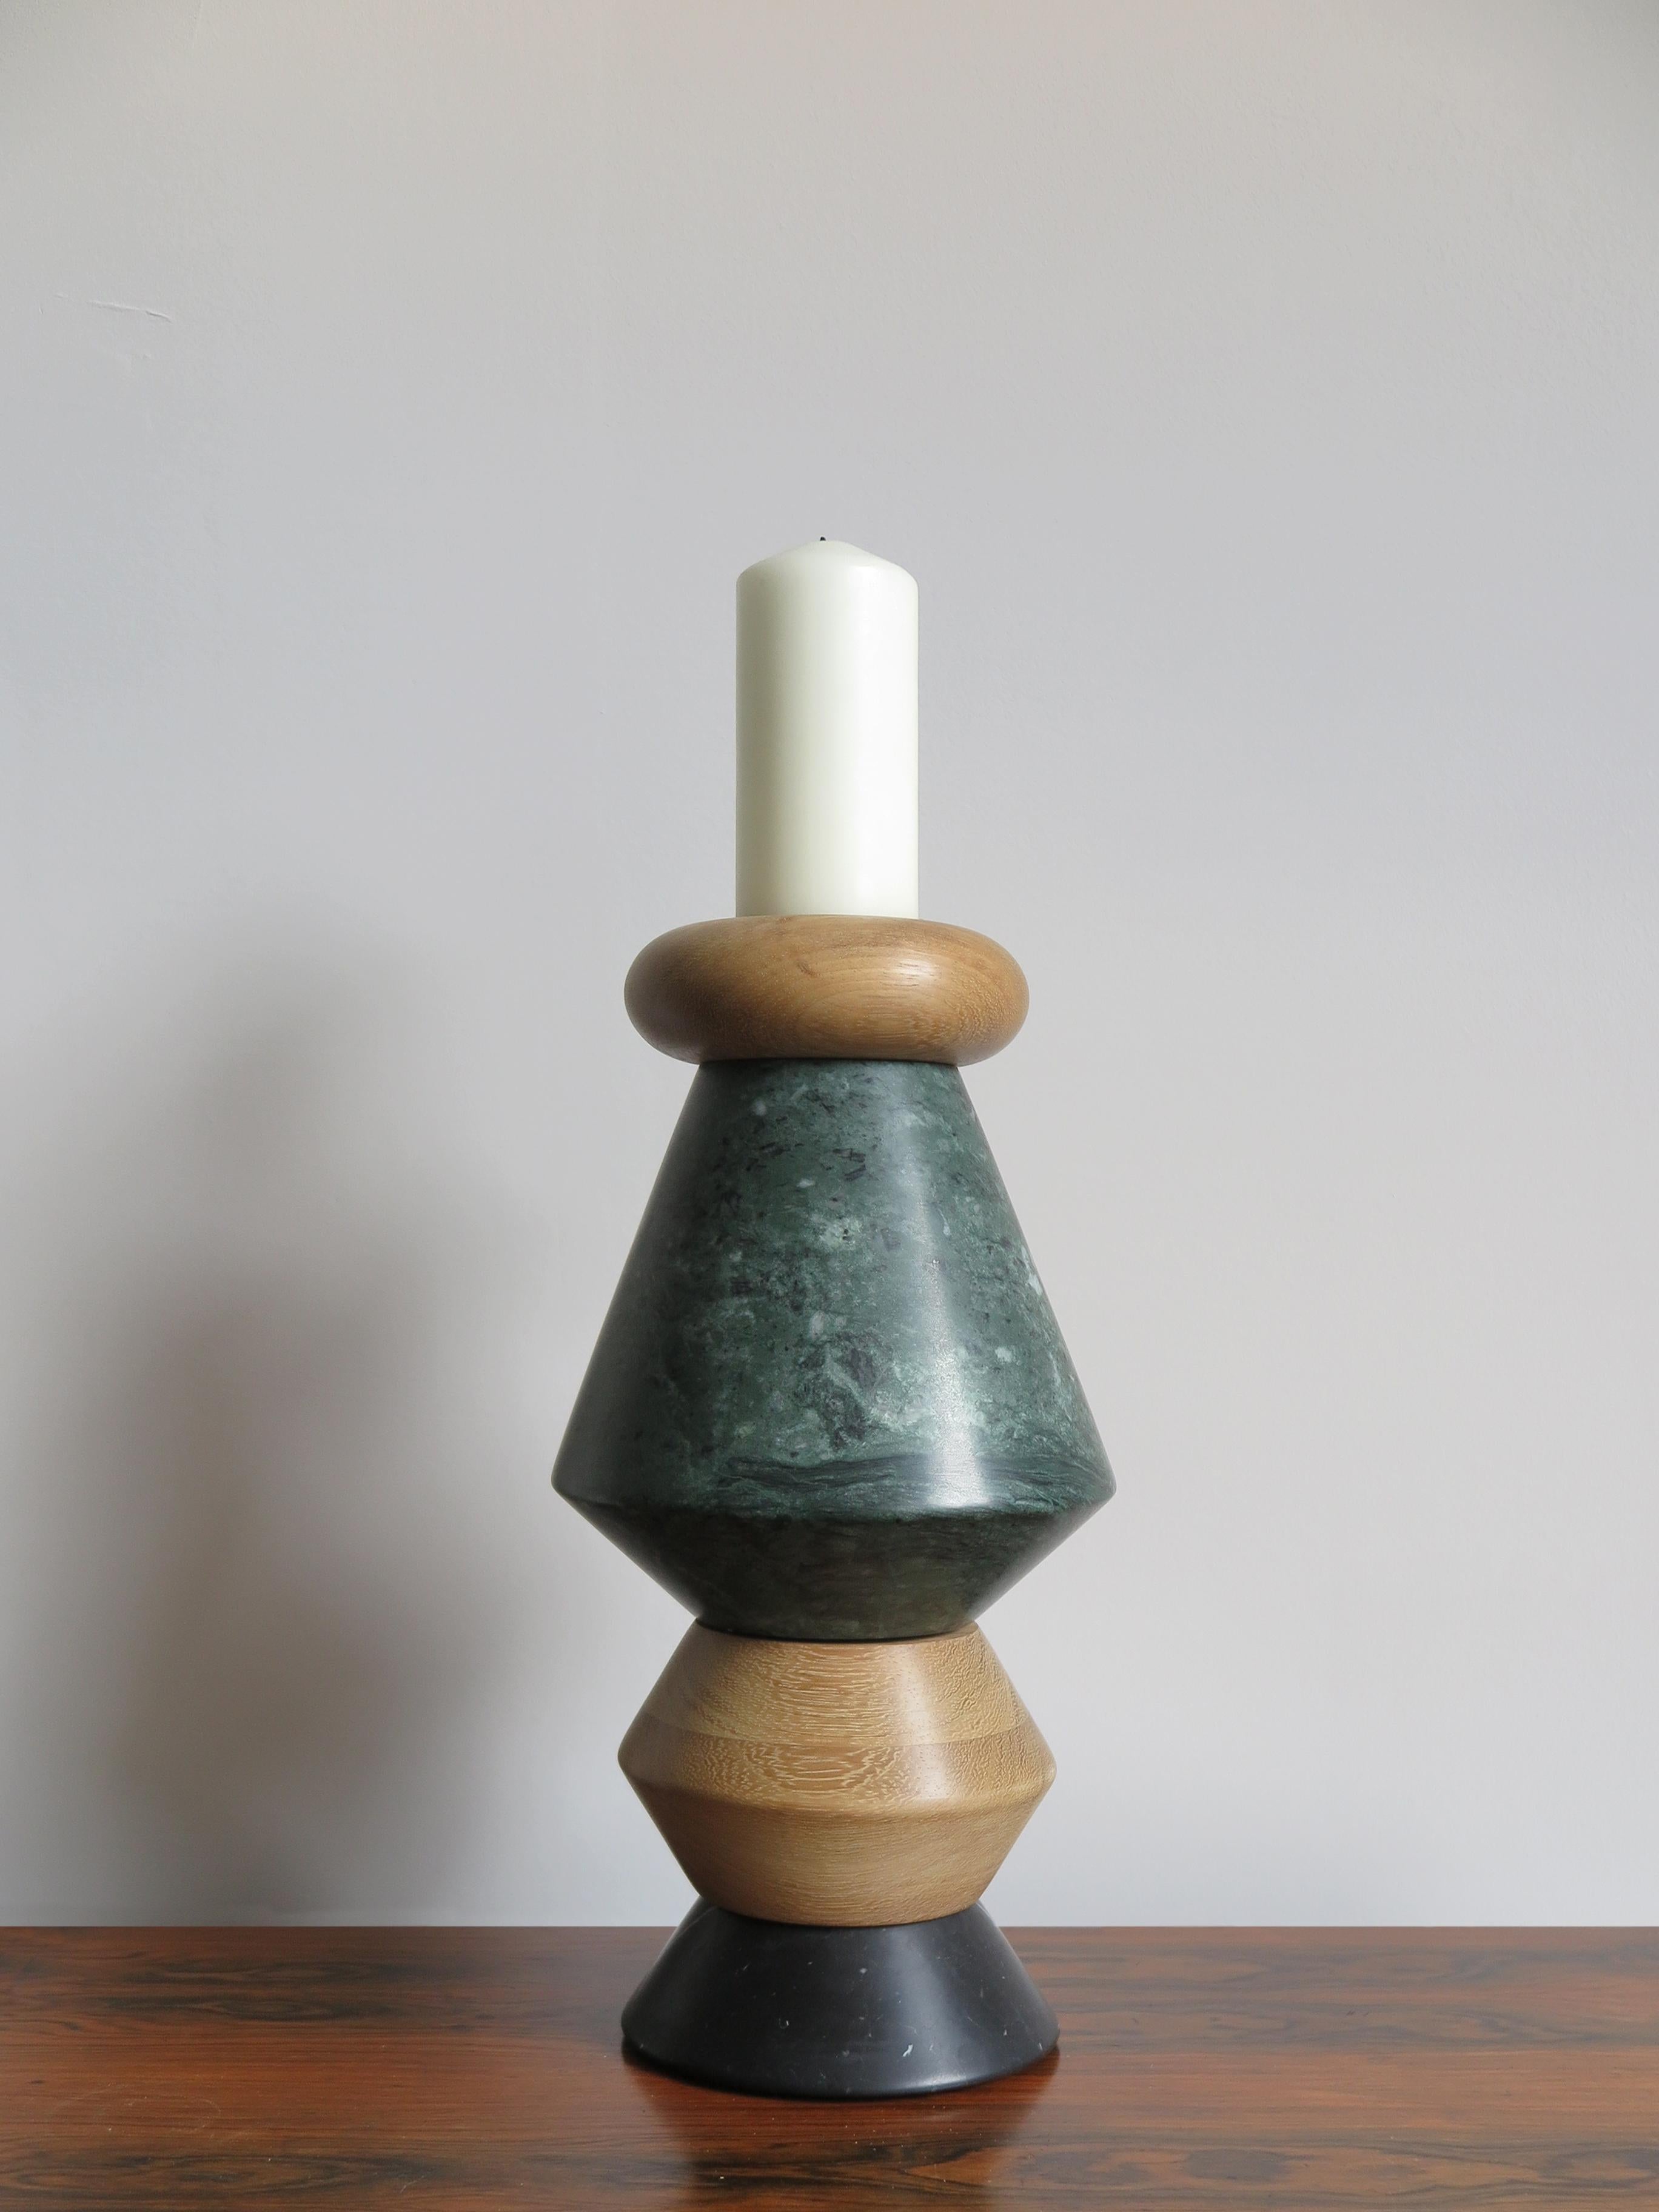 Large sculpture, candleholder and flower vase, modular as you like made up of black Marquinia and green Alpi marbles, and solid wood with including glass tube for fresh flowers.
New design Capperidicasa

Designed for large, contemporary and